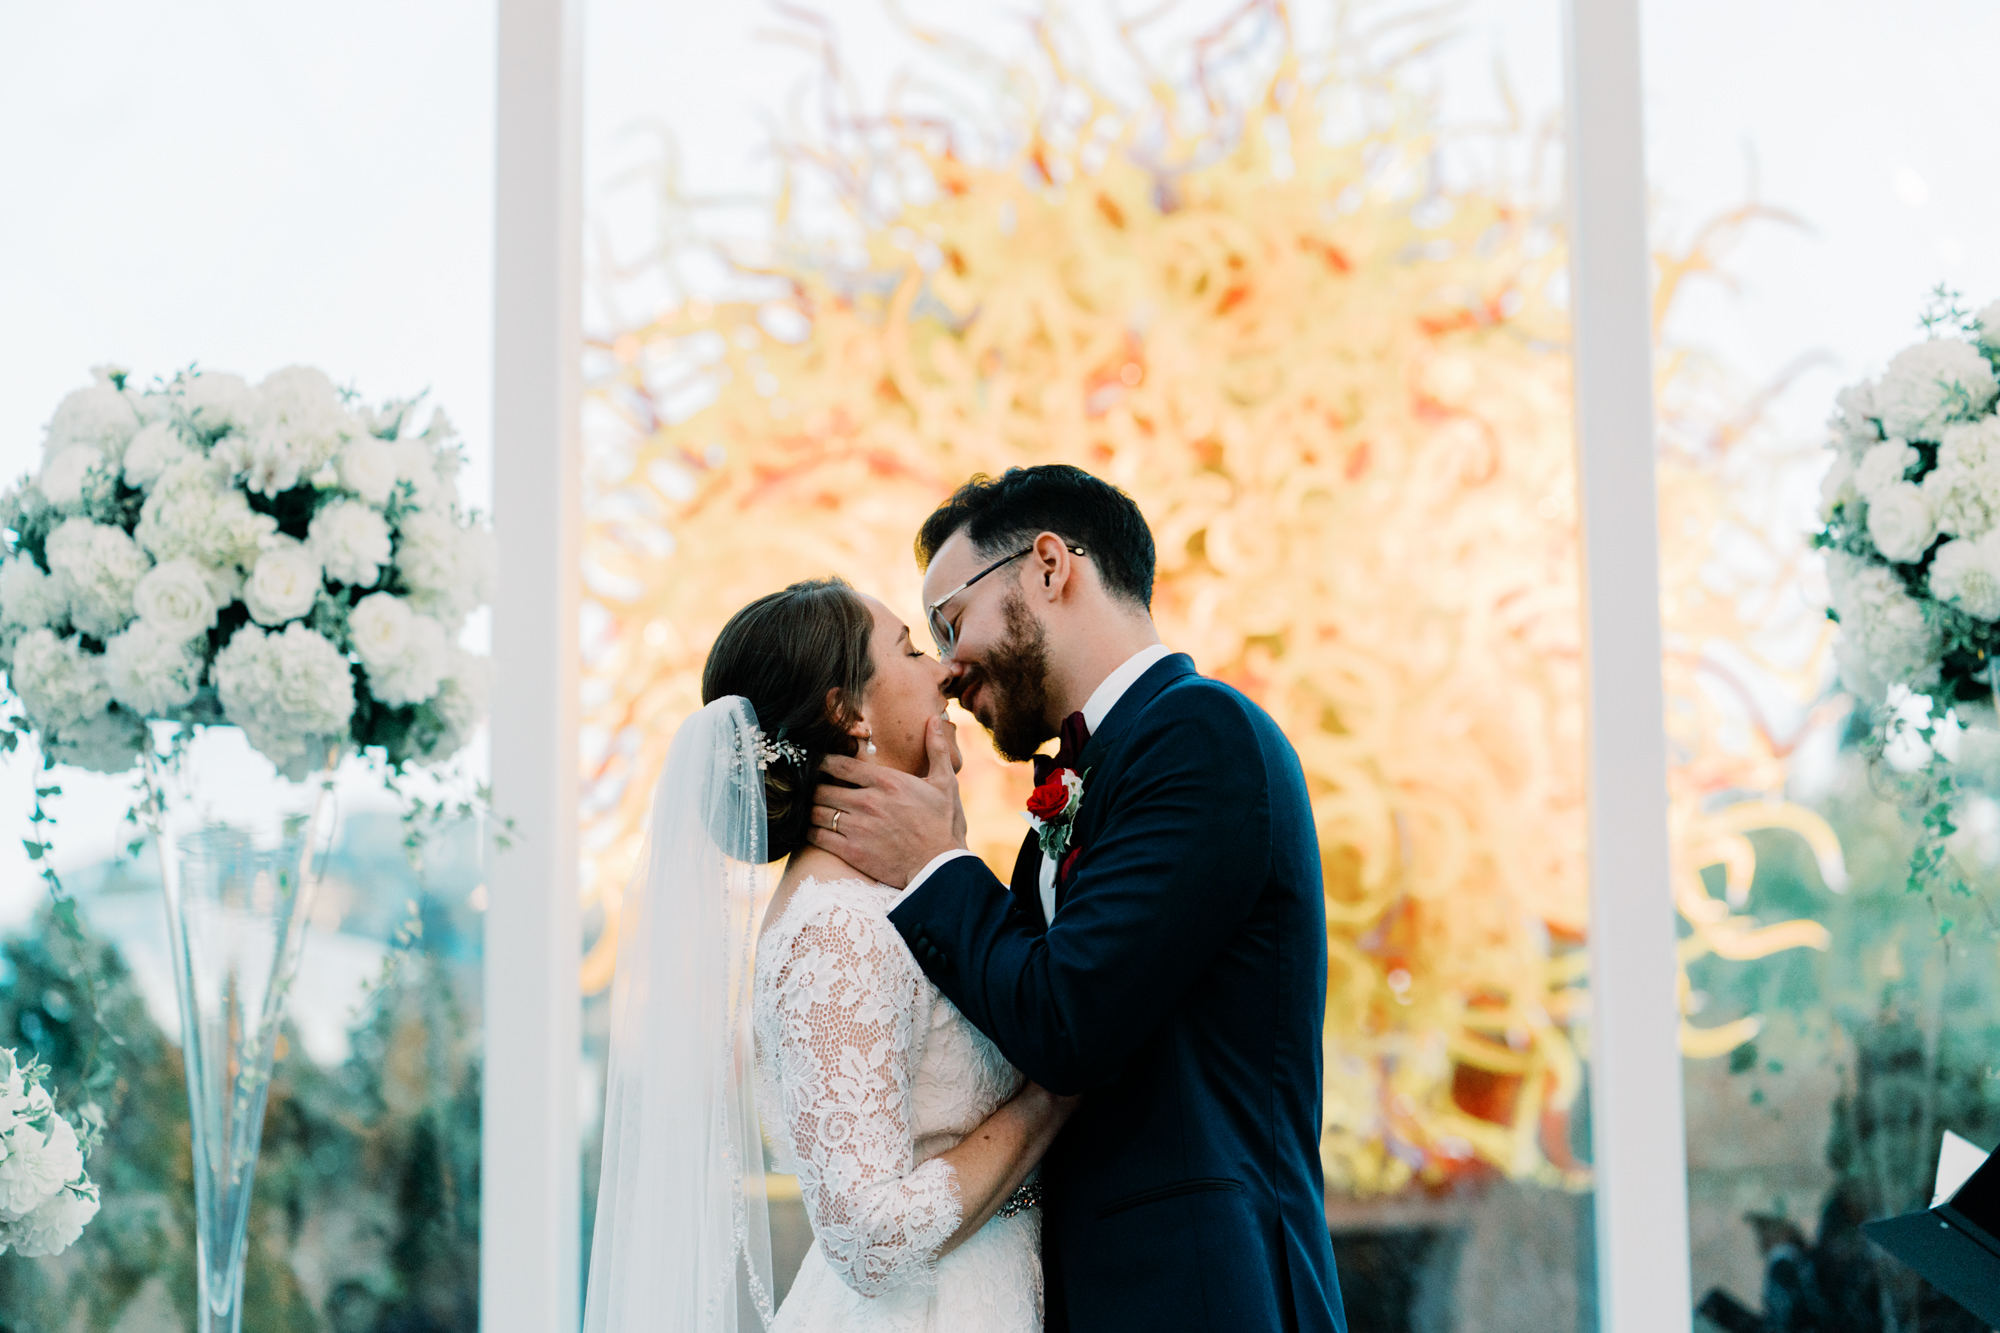 Lauren and Kyle celebrate their nuptials with a kiss